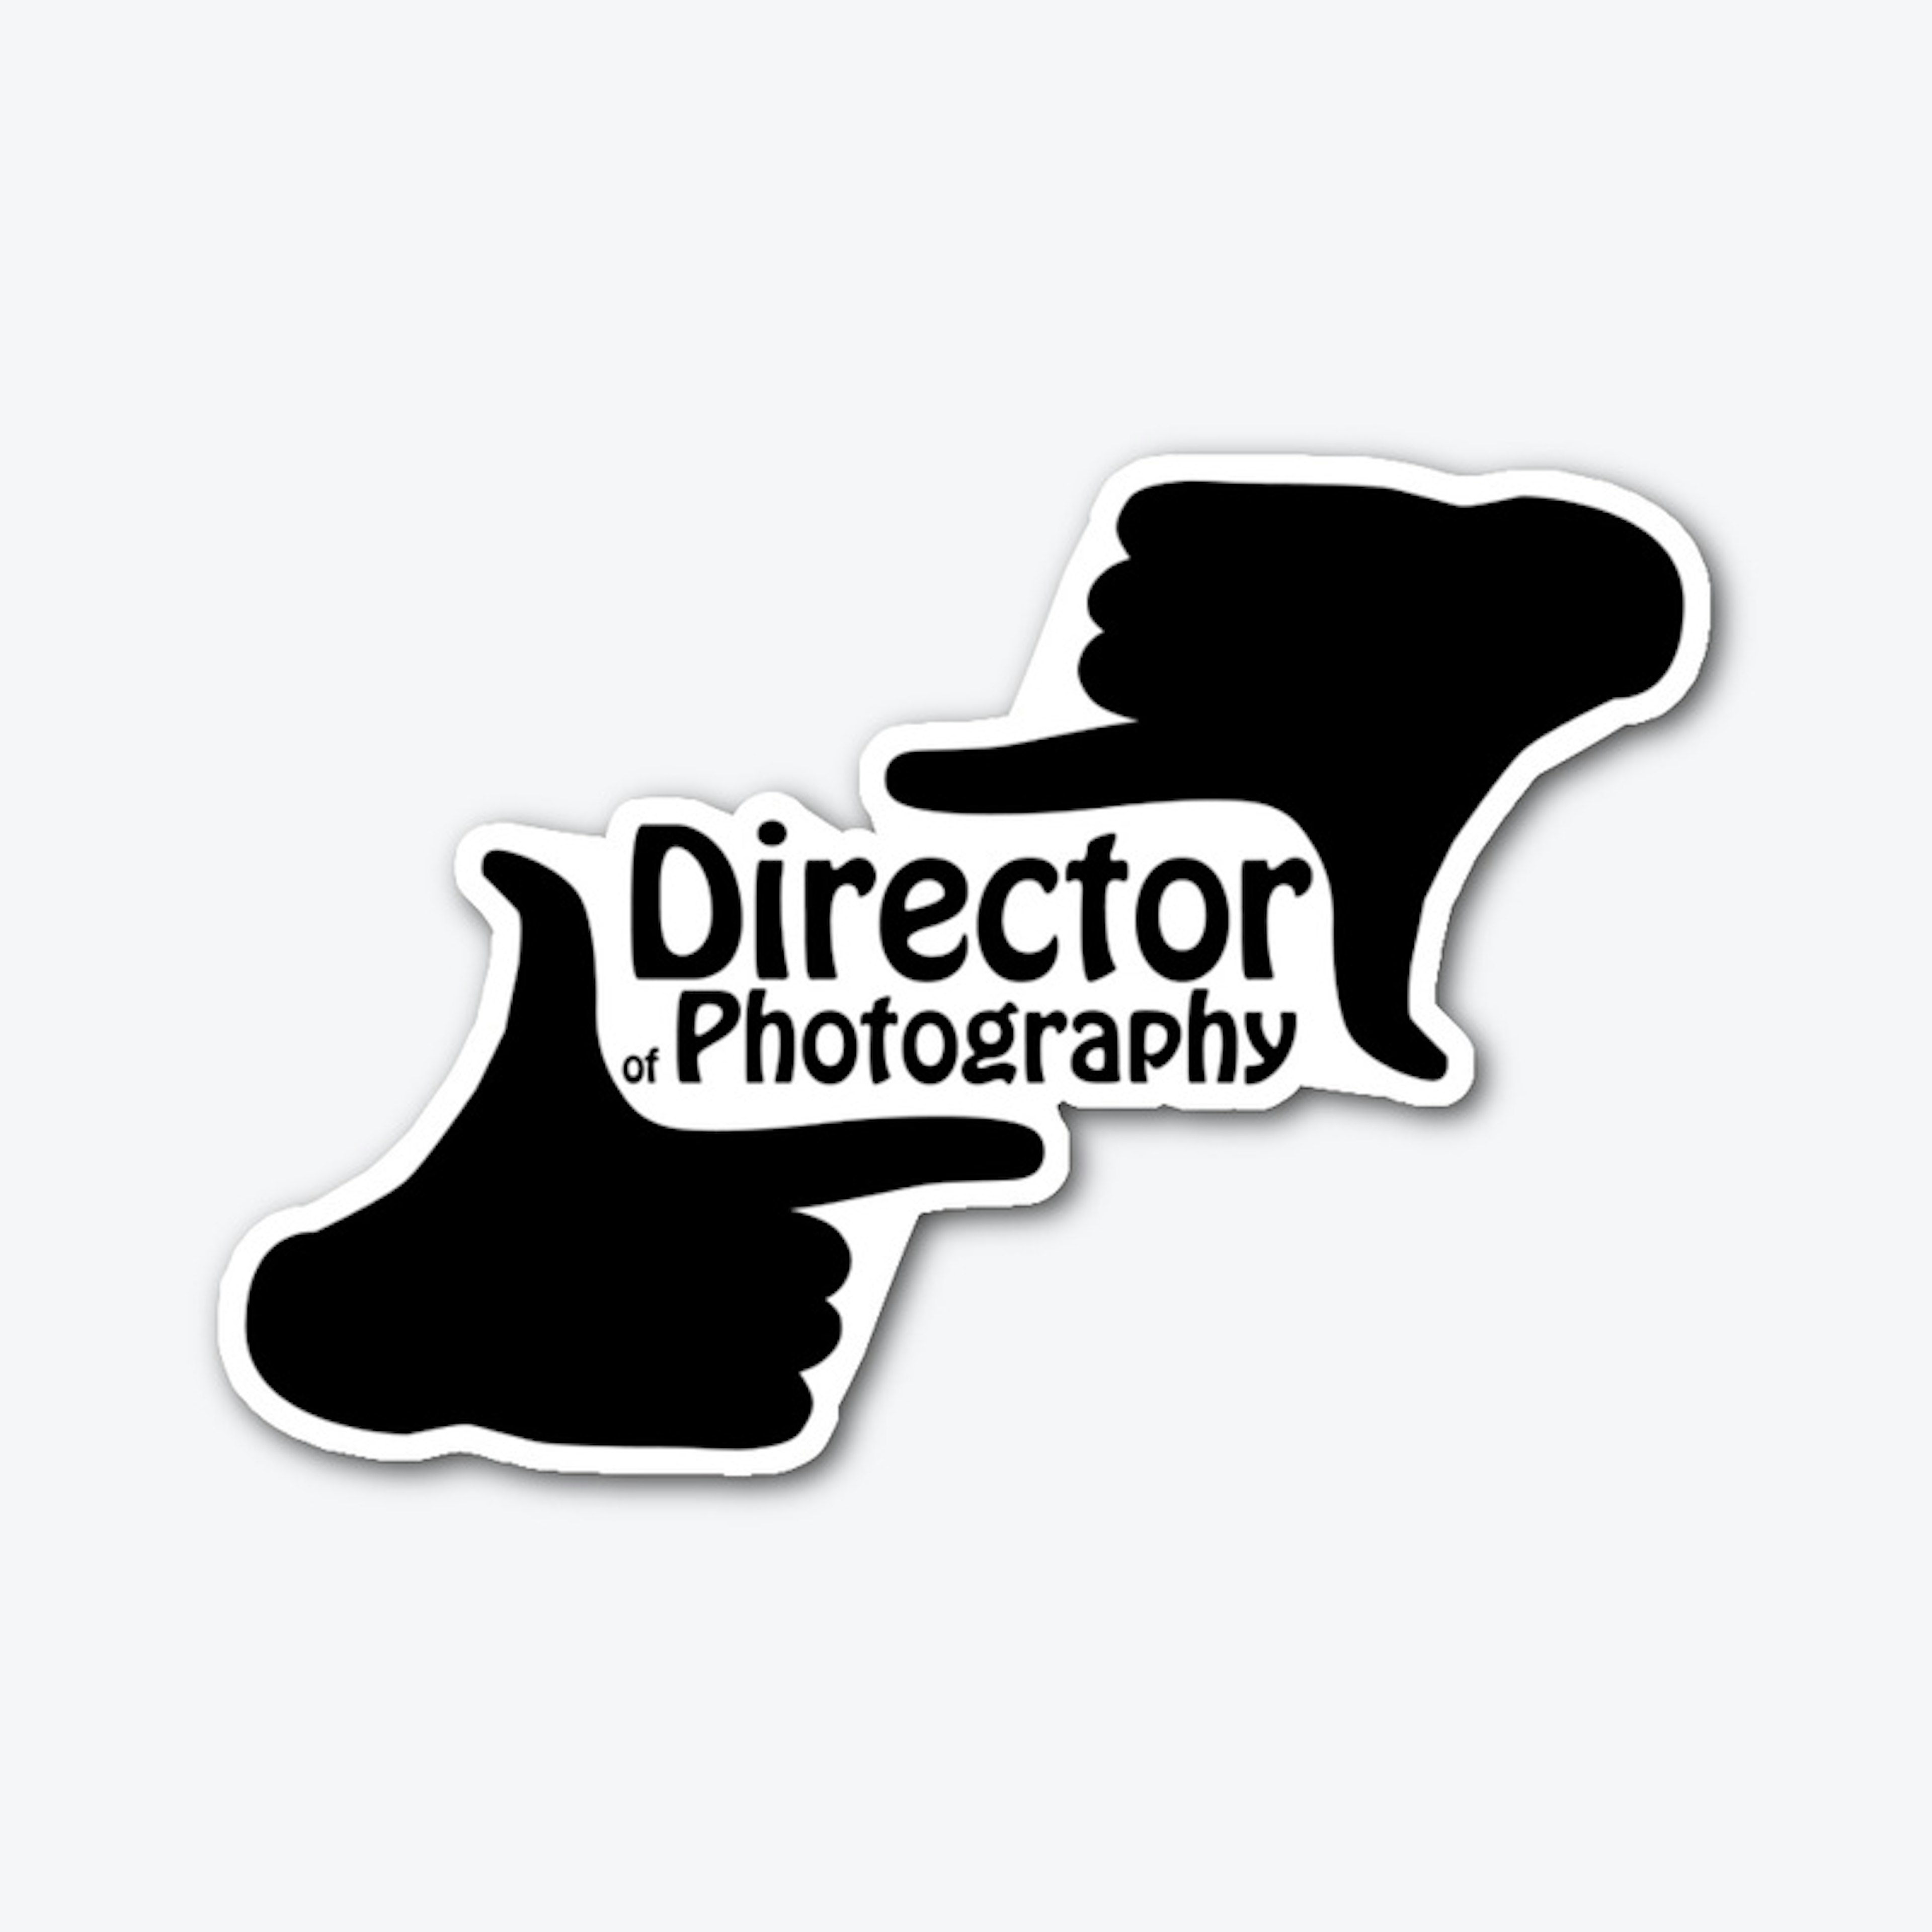 Director of Photography | Sticker